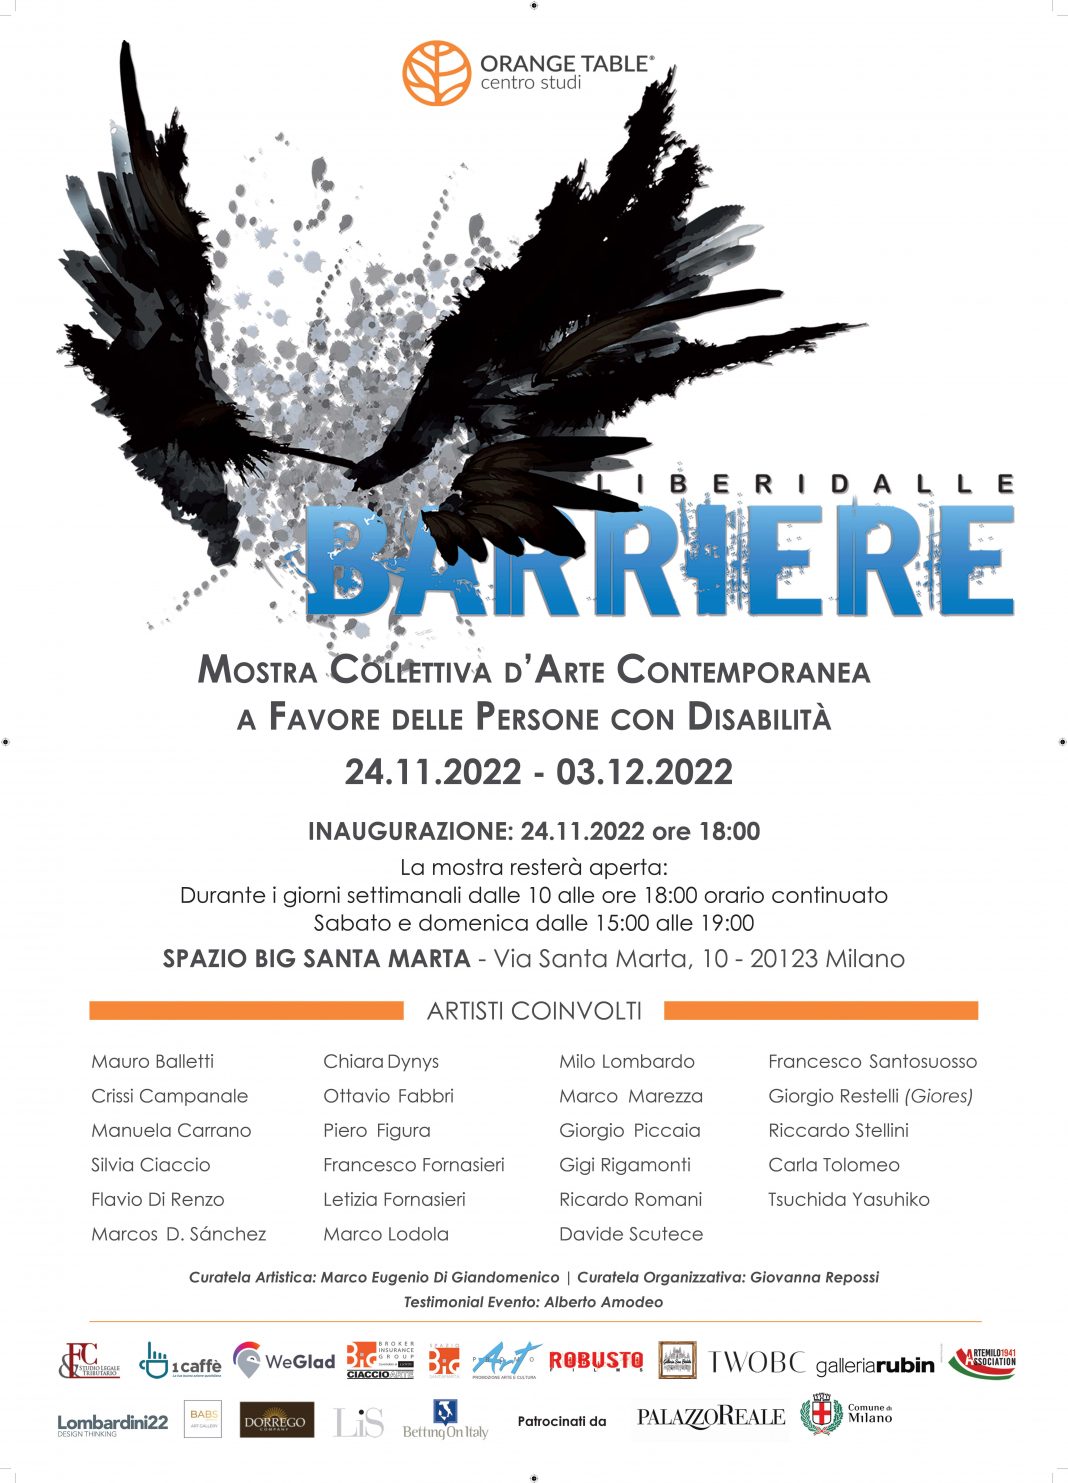 Liberi dalle barrierehttps://www.exibart.com/repository/media/formidable/11/img/9bc/Poster-def-1068x1483.jpg